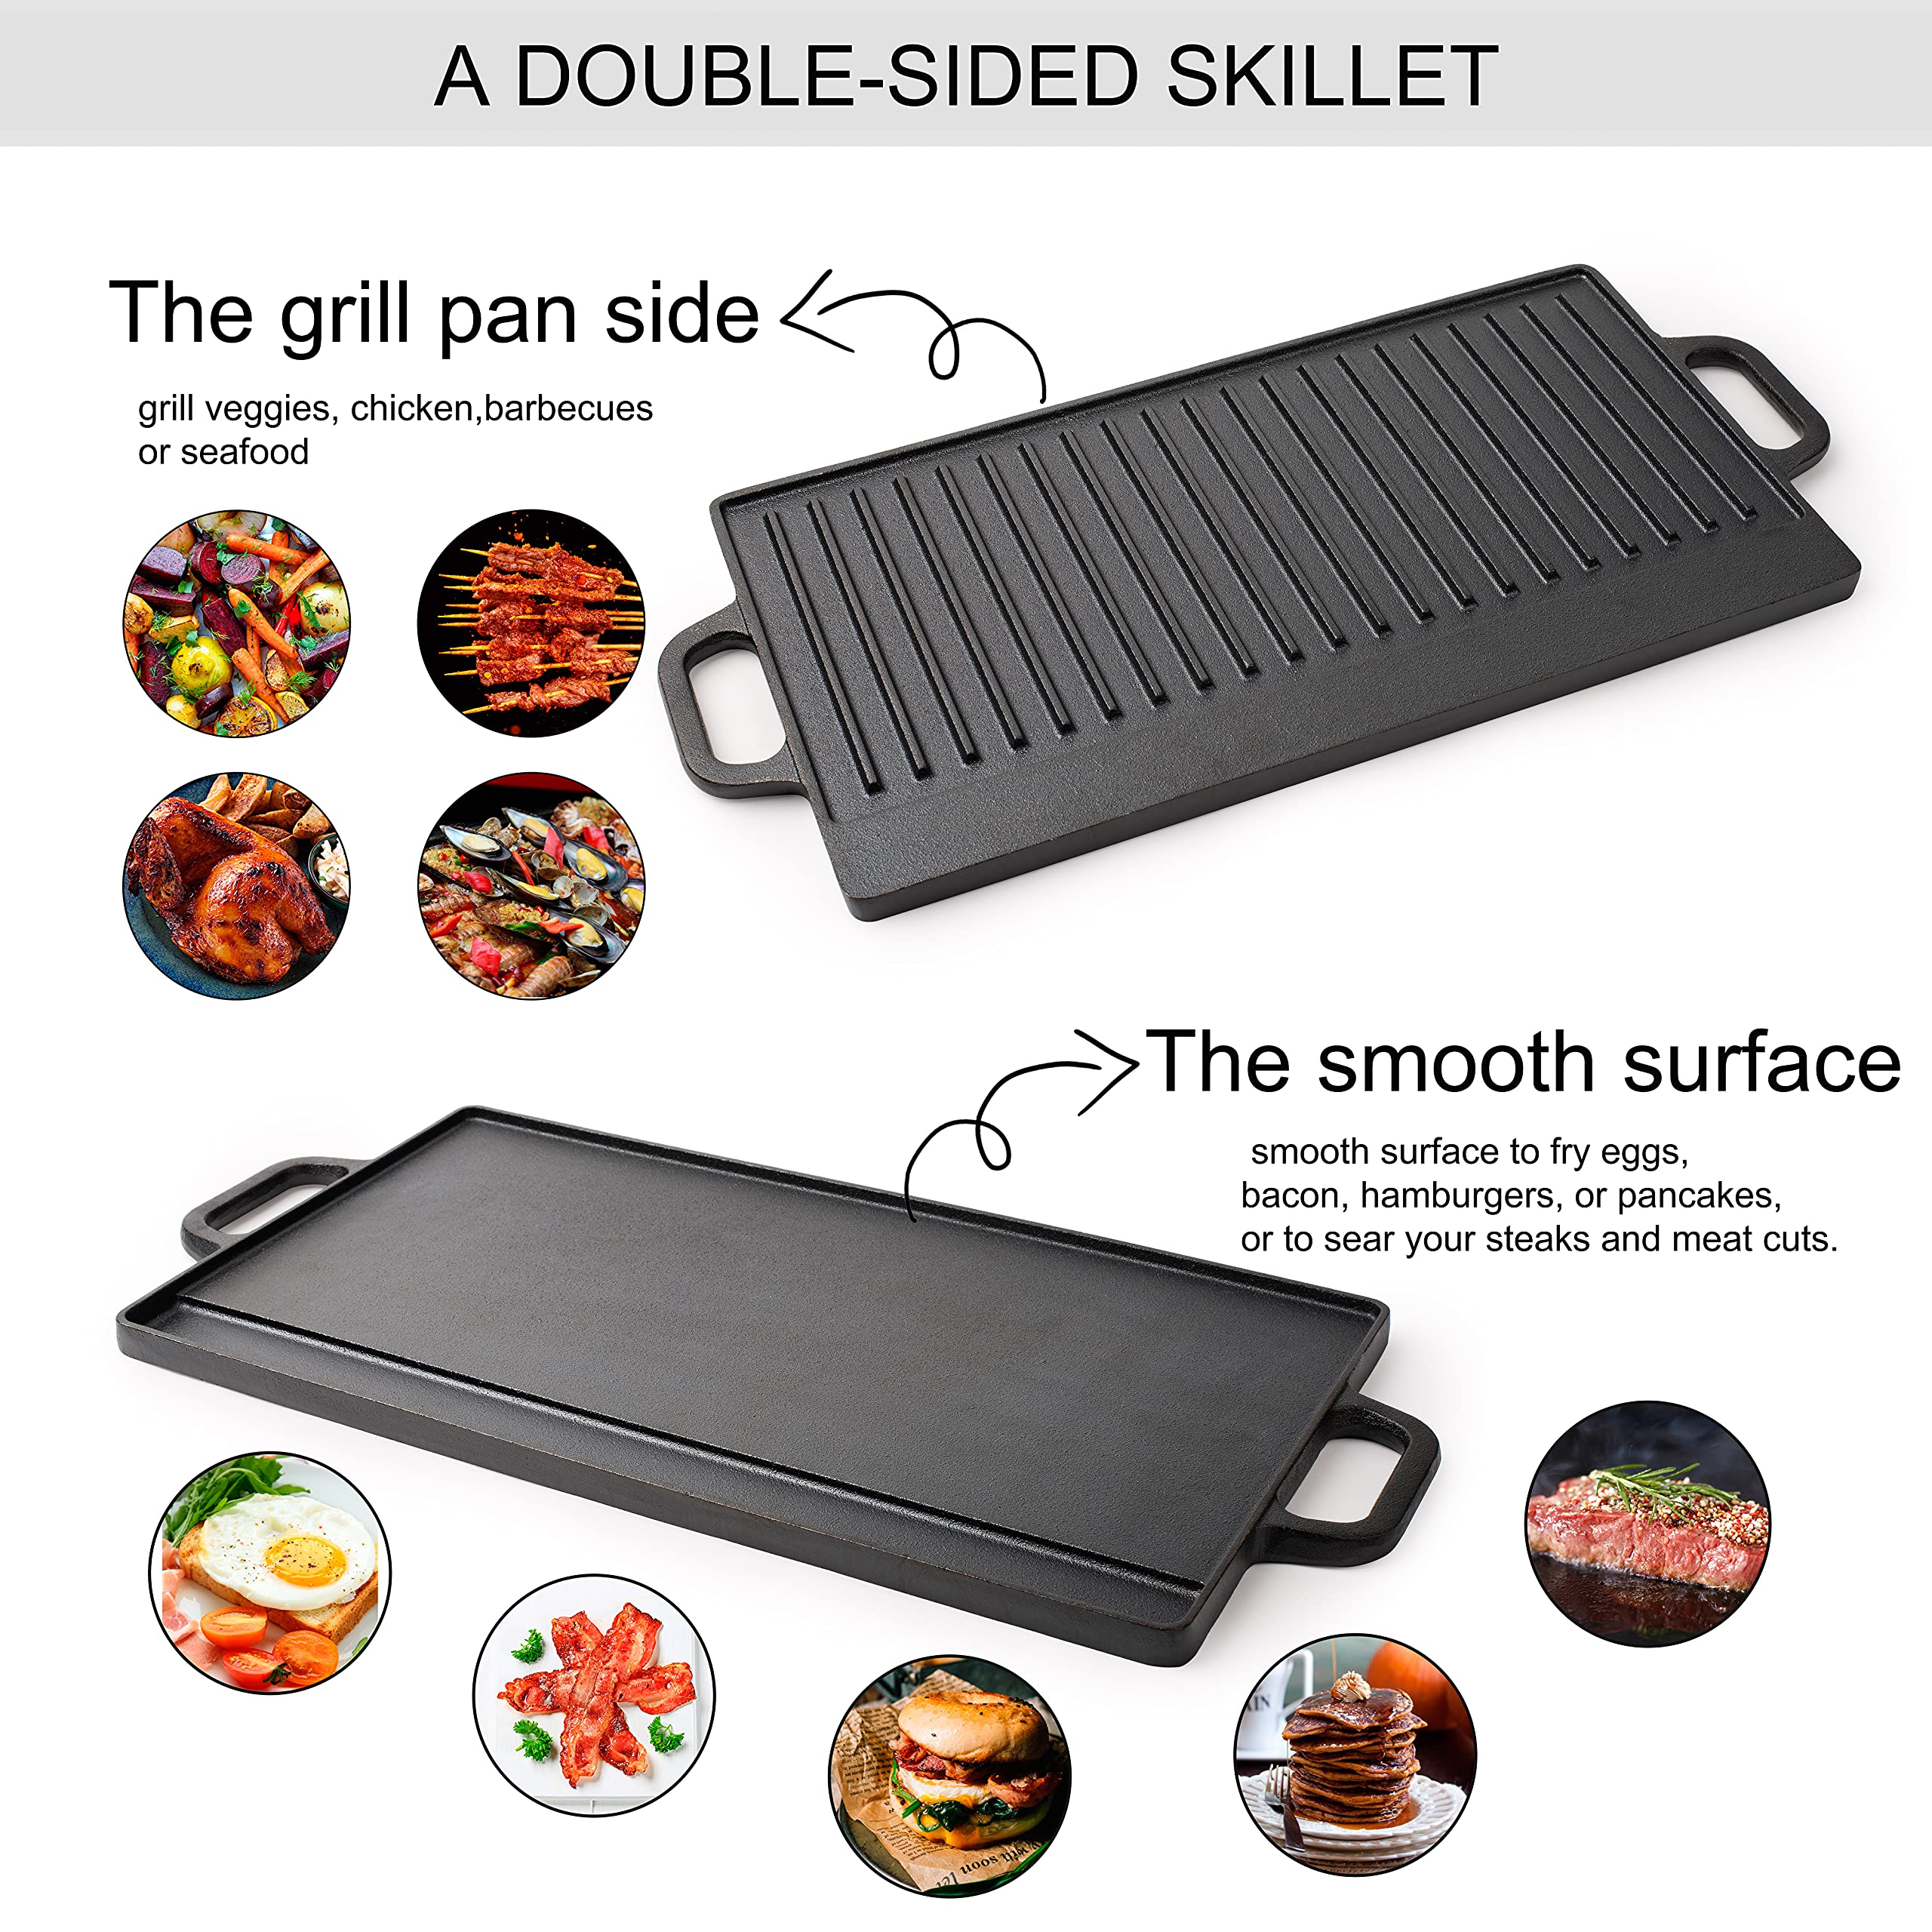 Max K 2-in-1 Cast Iron Grill & Griddle - Pre-Seasoned Reversible Grilling Plate - Oven, Campfire, Double Burner Stove Top Skillet - With Handles, Grease Reservoir - 20"x9" Inch